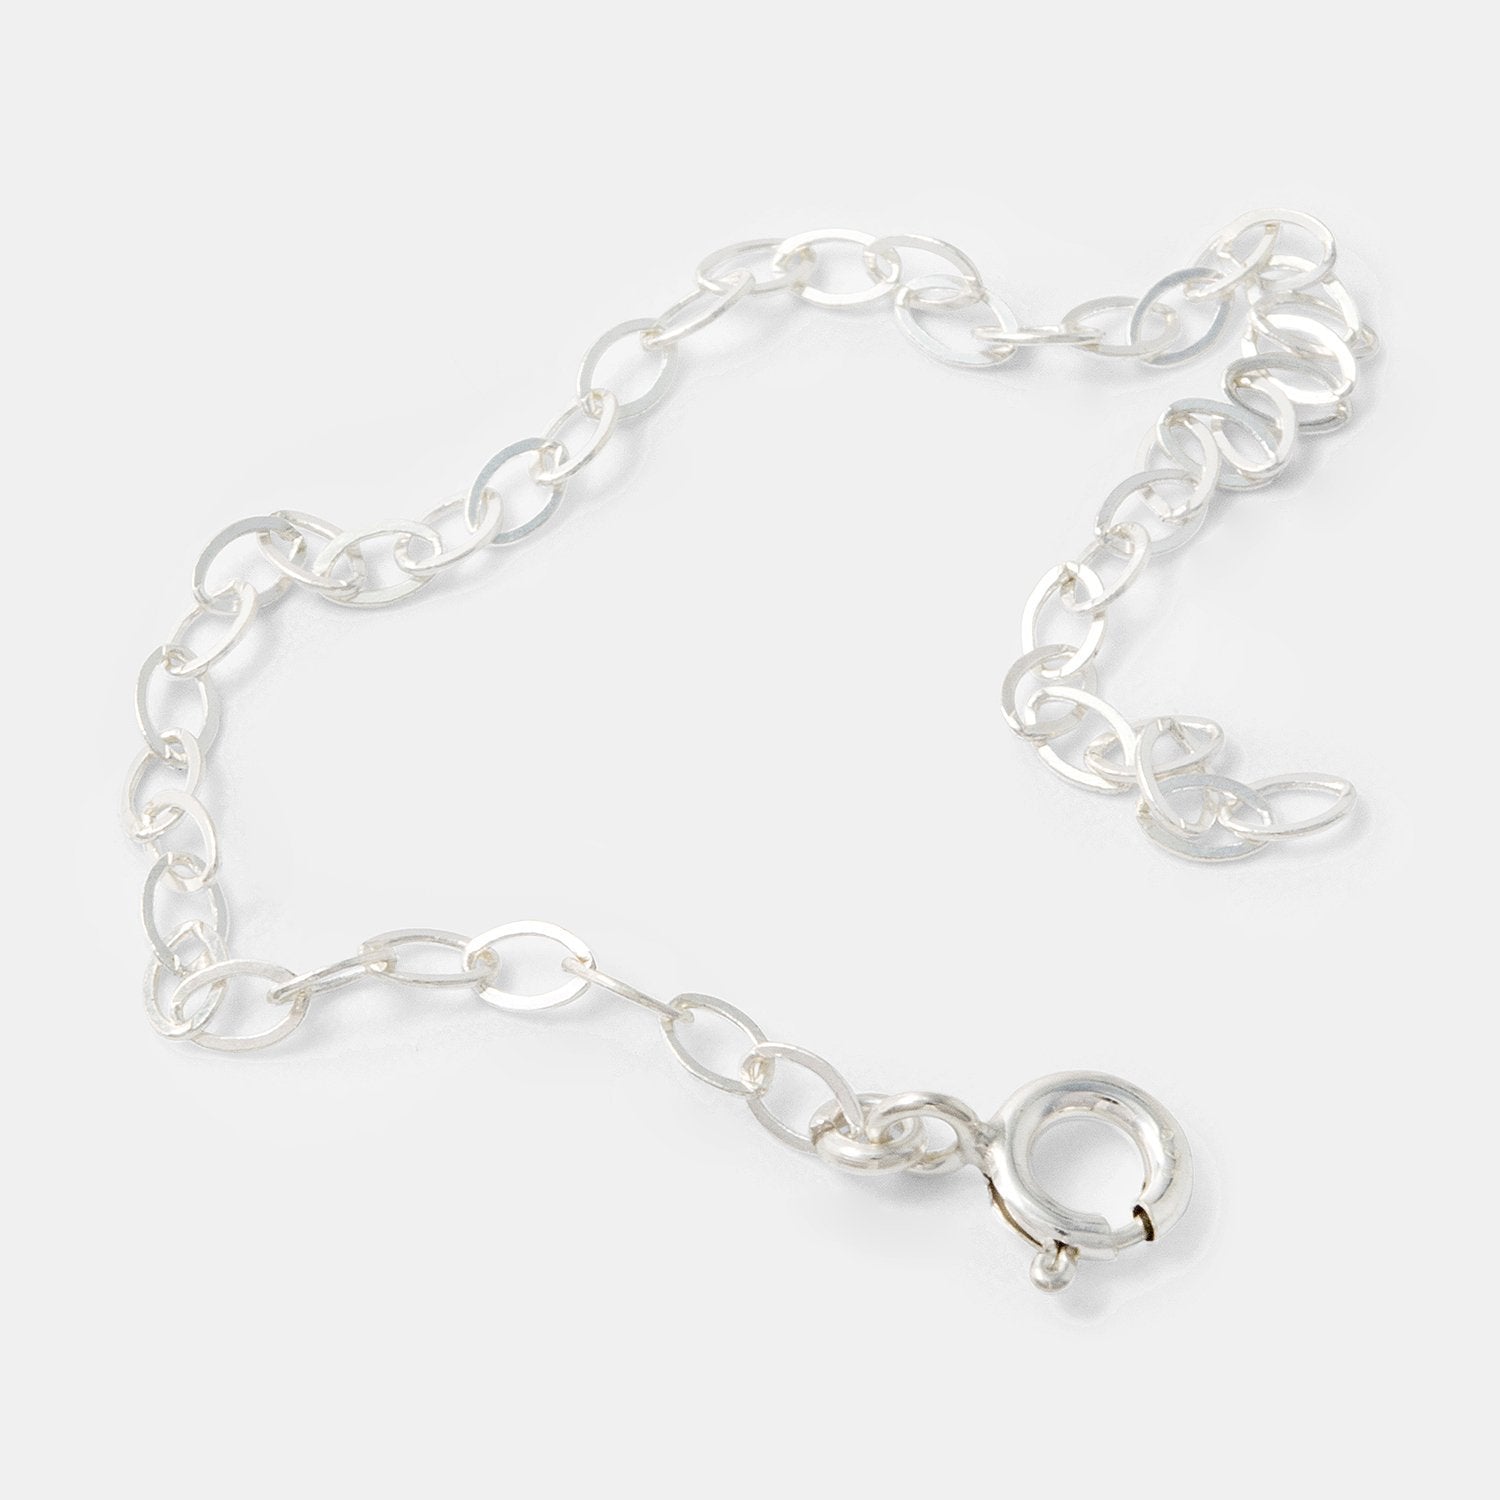 Necklace chain extender: silver - Simone Walsh Jewellery Australia